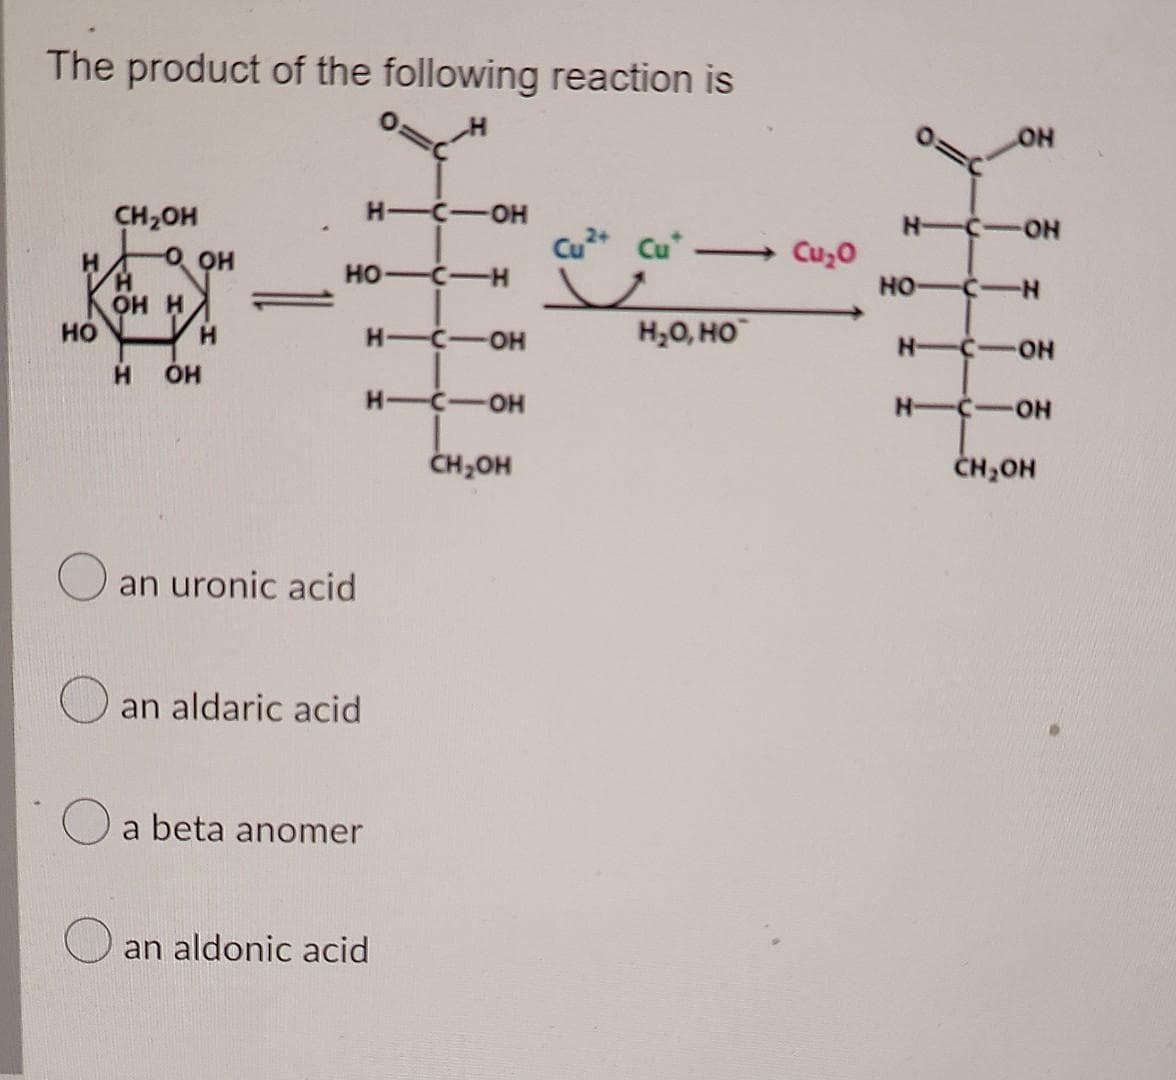 The product of the following reaction is
НО
CH₂OH
Н
ОН Н
O
ОН
Н
Н OH
H-C-OH
HO-C-H
an uronic acid
an aldaric acid
a beta anomer
H-C-OH
-C-OH
CH OH
Н-
an aldonic acid
Cu2+ Cut -
и
- Cu20
Н2О, НО
OH
HICION
HO-C-N
HICION
HICION
CH OH